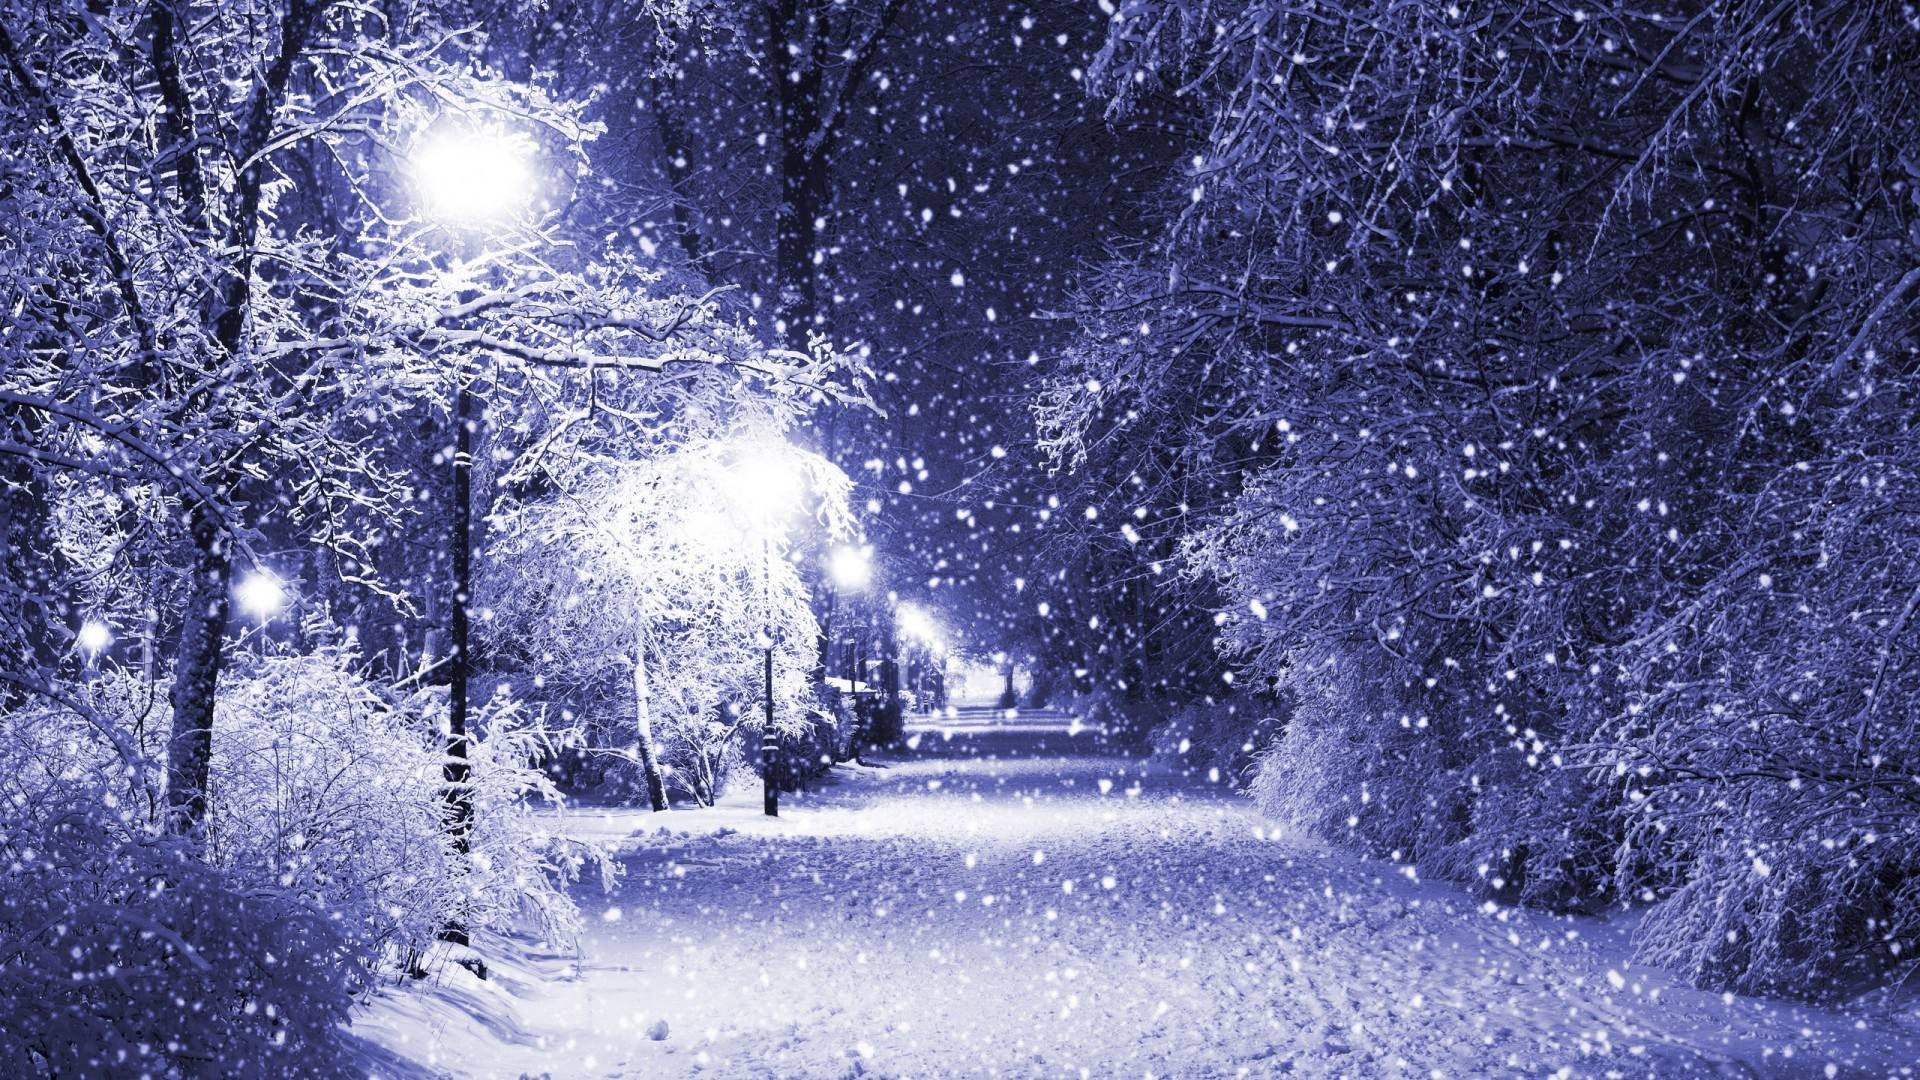 1920x1080 Snowfall on the Street Wallpaper | warnerboutique